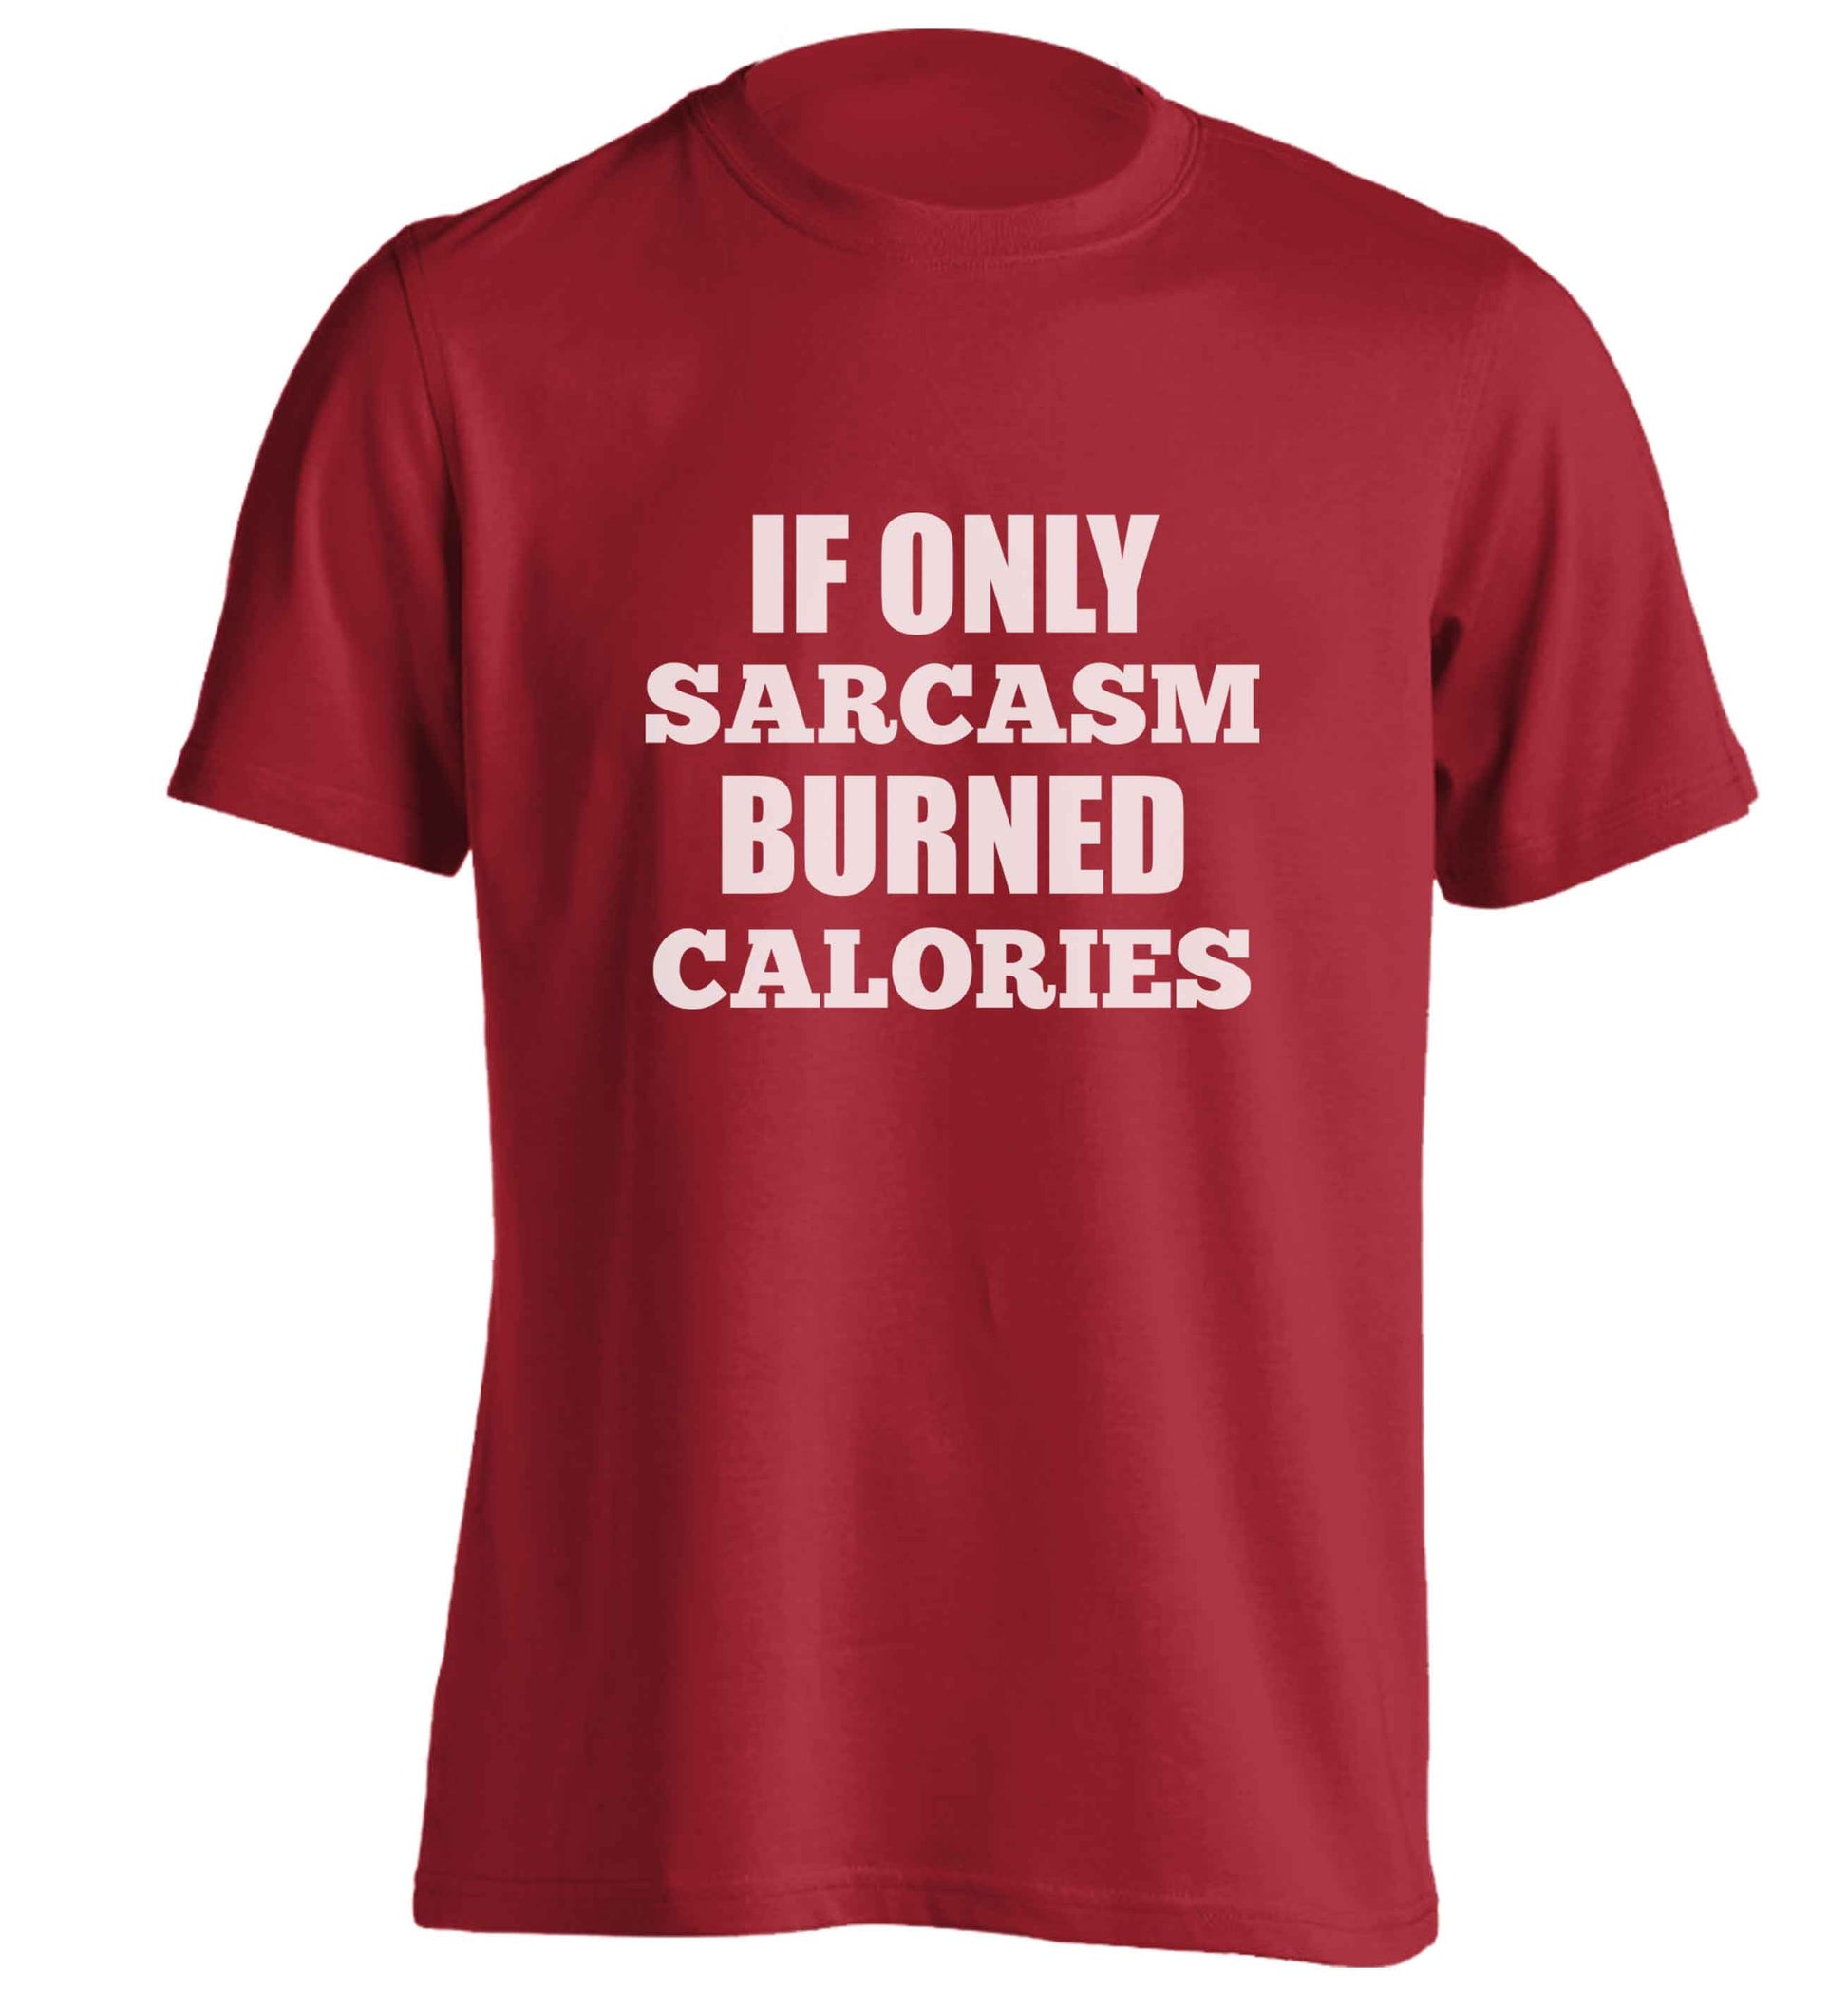 If only sarcasm burned calories adults unisex red Tshirt 2XL